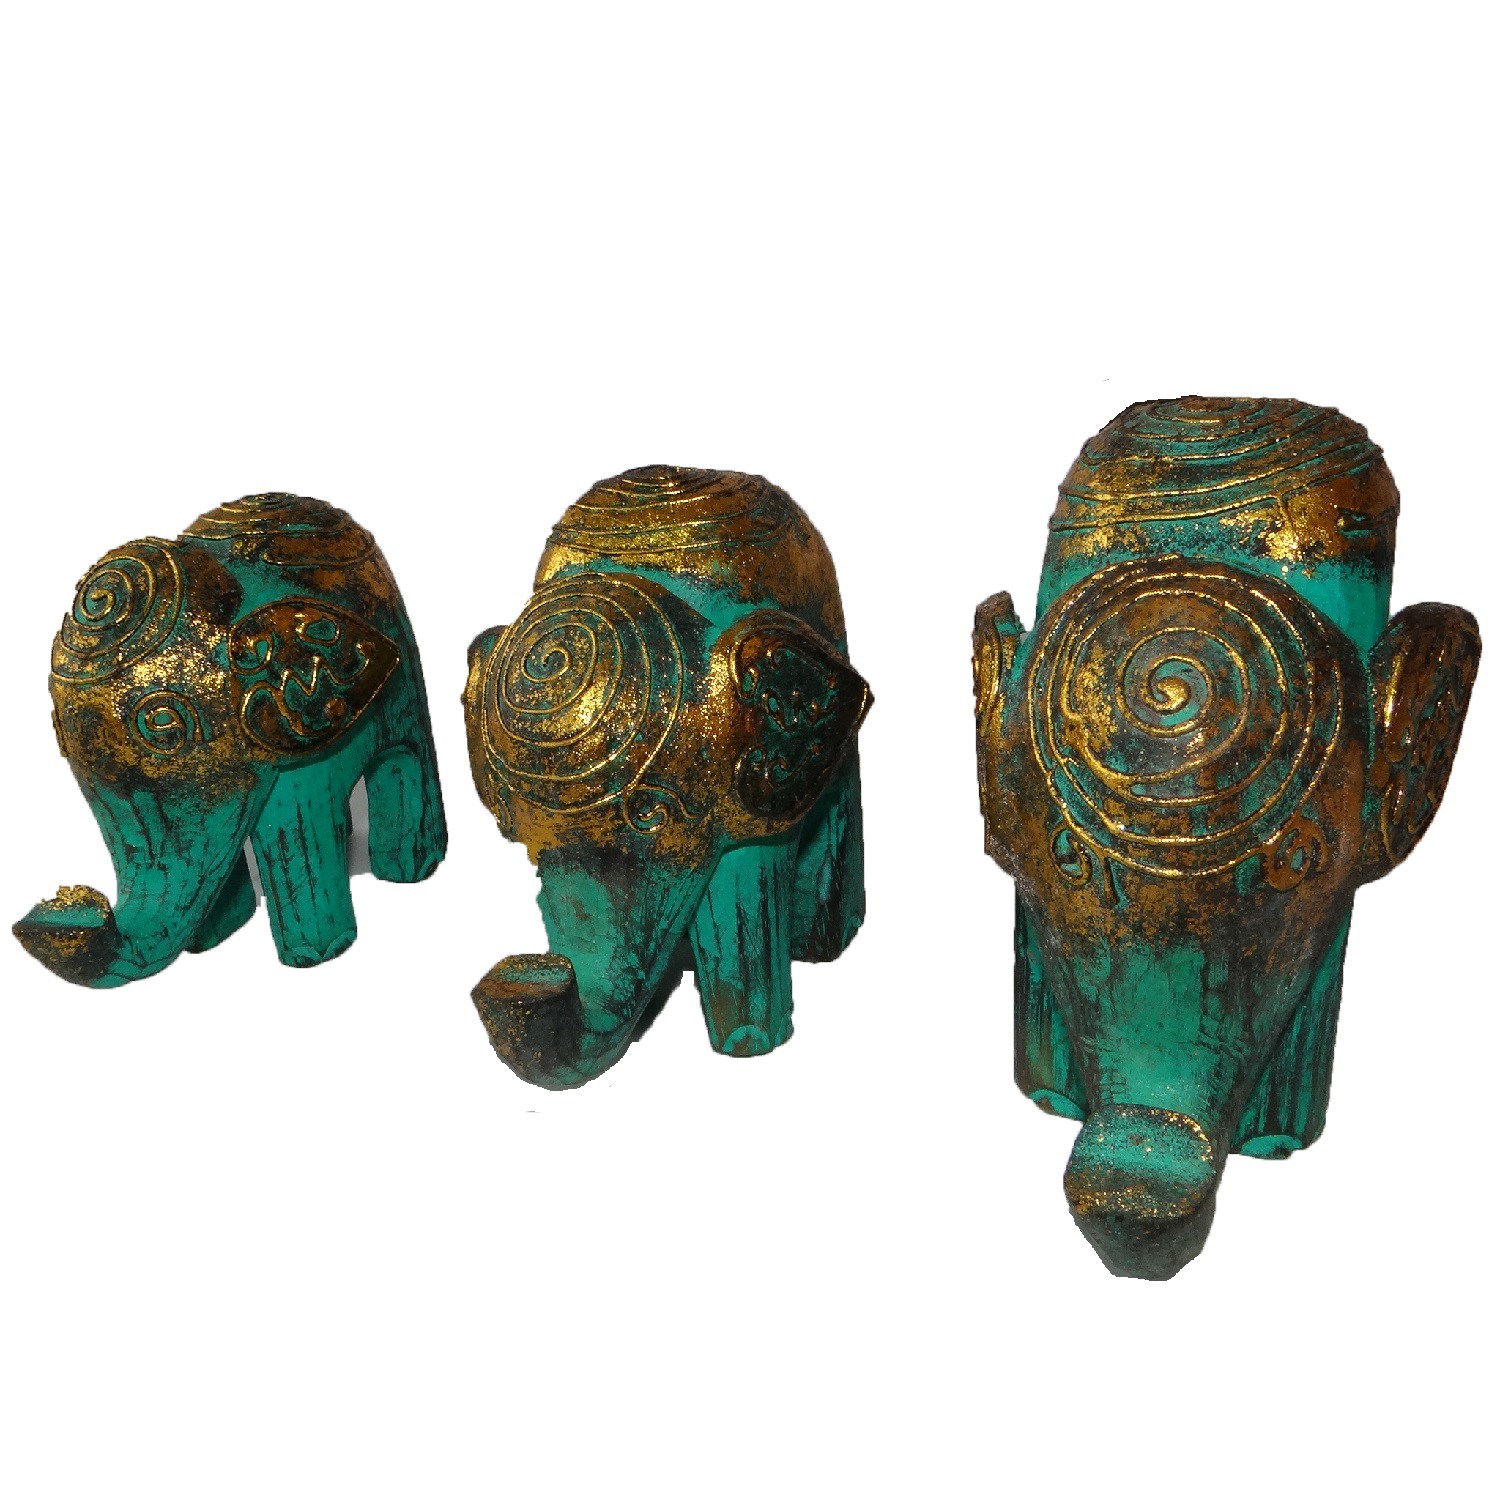 Set of 3 Green Elephants | Ornaments | Voyage Fair Trade Gifts